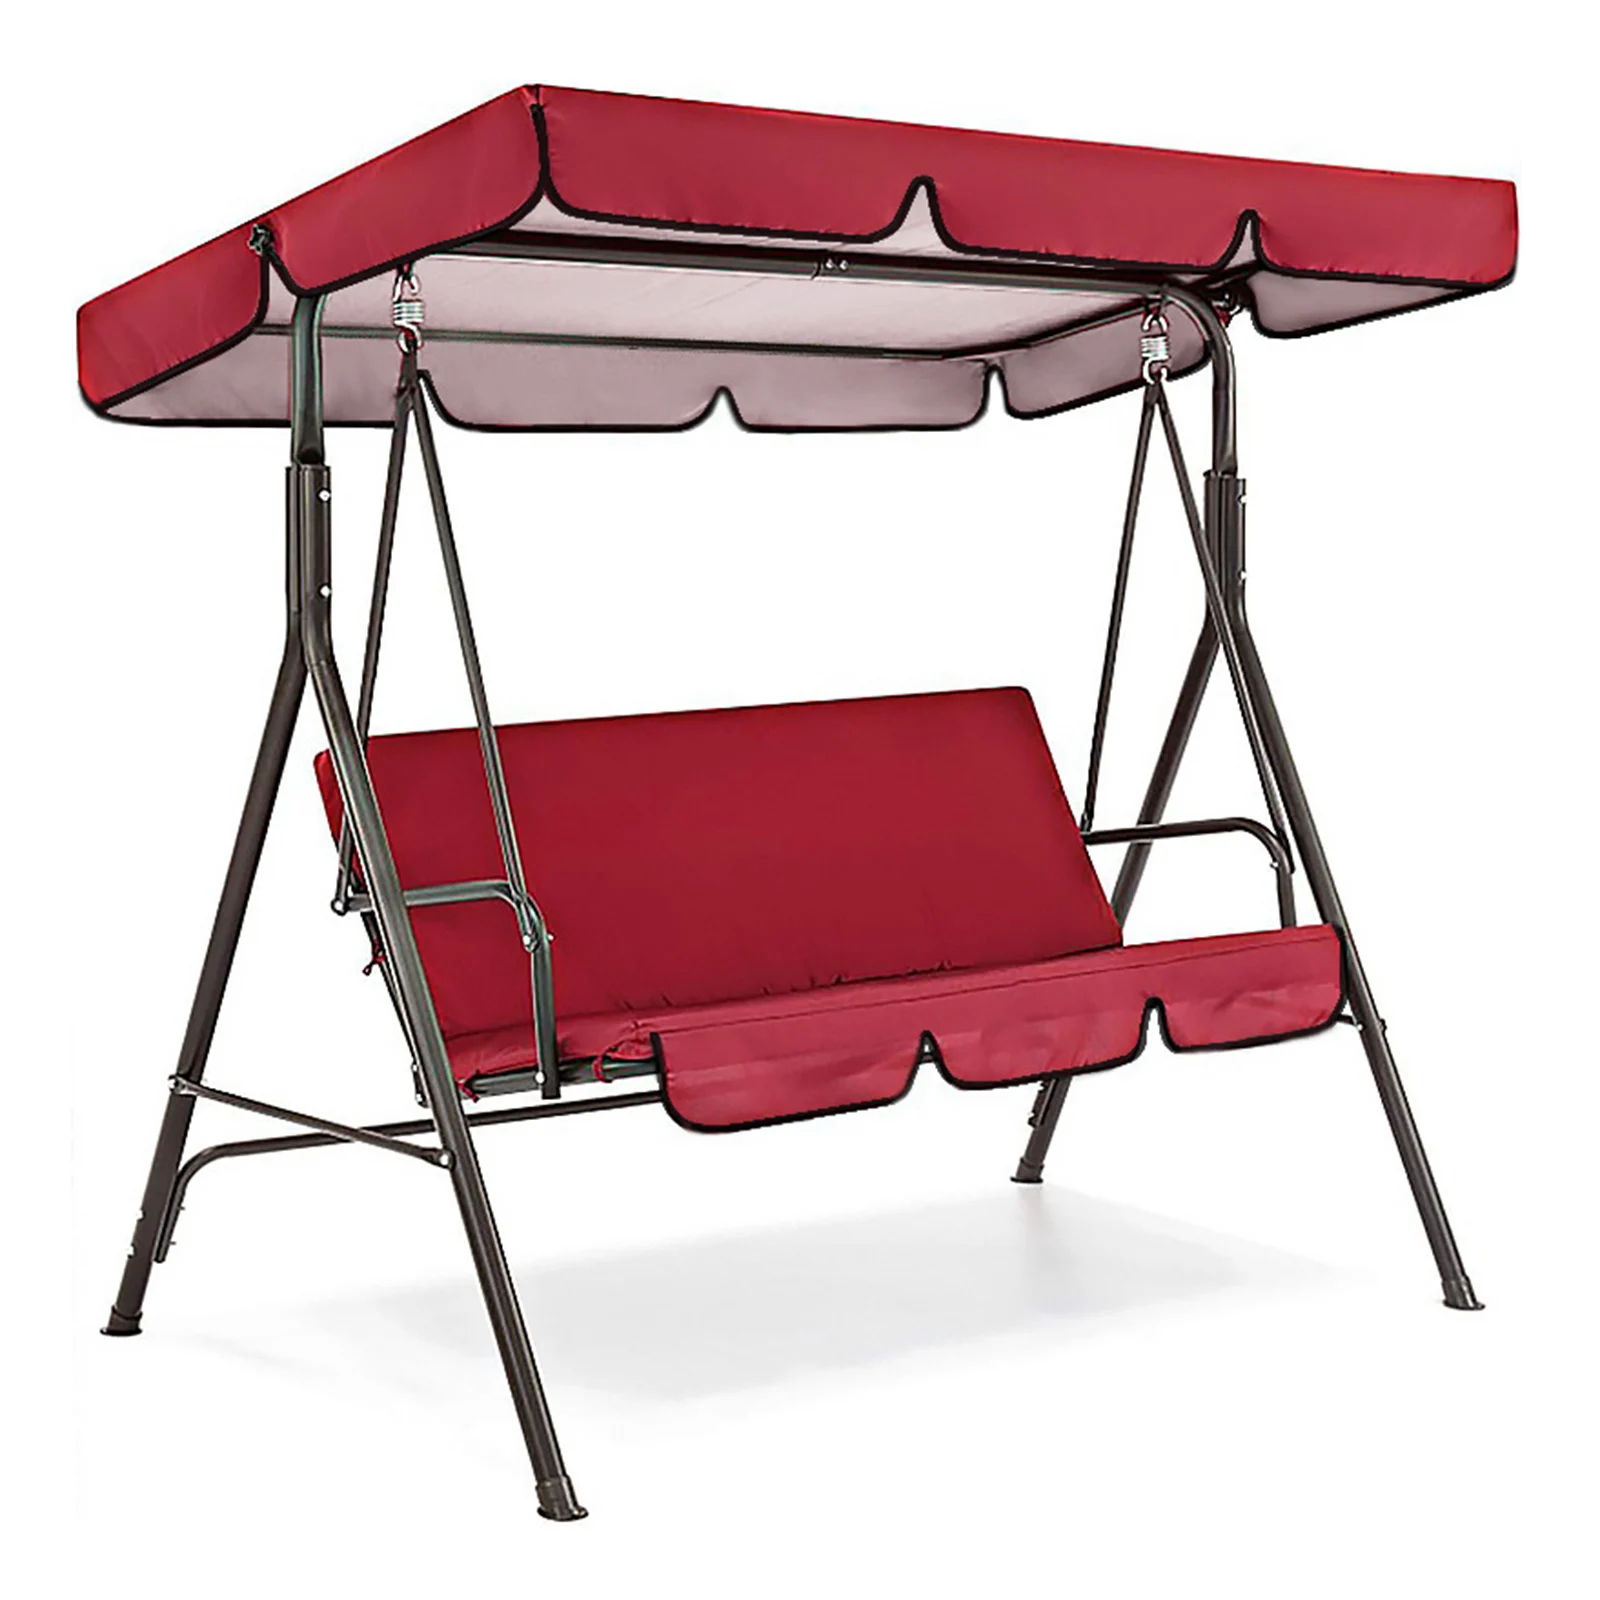 Swing Cover Set 3 Seat Swing Seat Cushion Cover + Top Cover Patio Swing Chair Hammock Replacement Canopy Seat Cover Kit